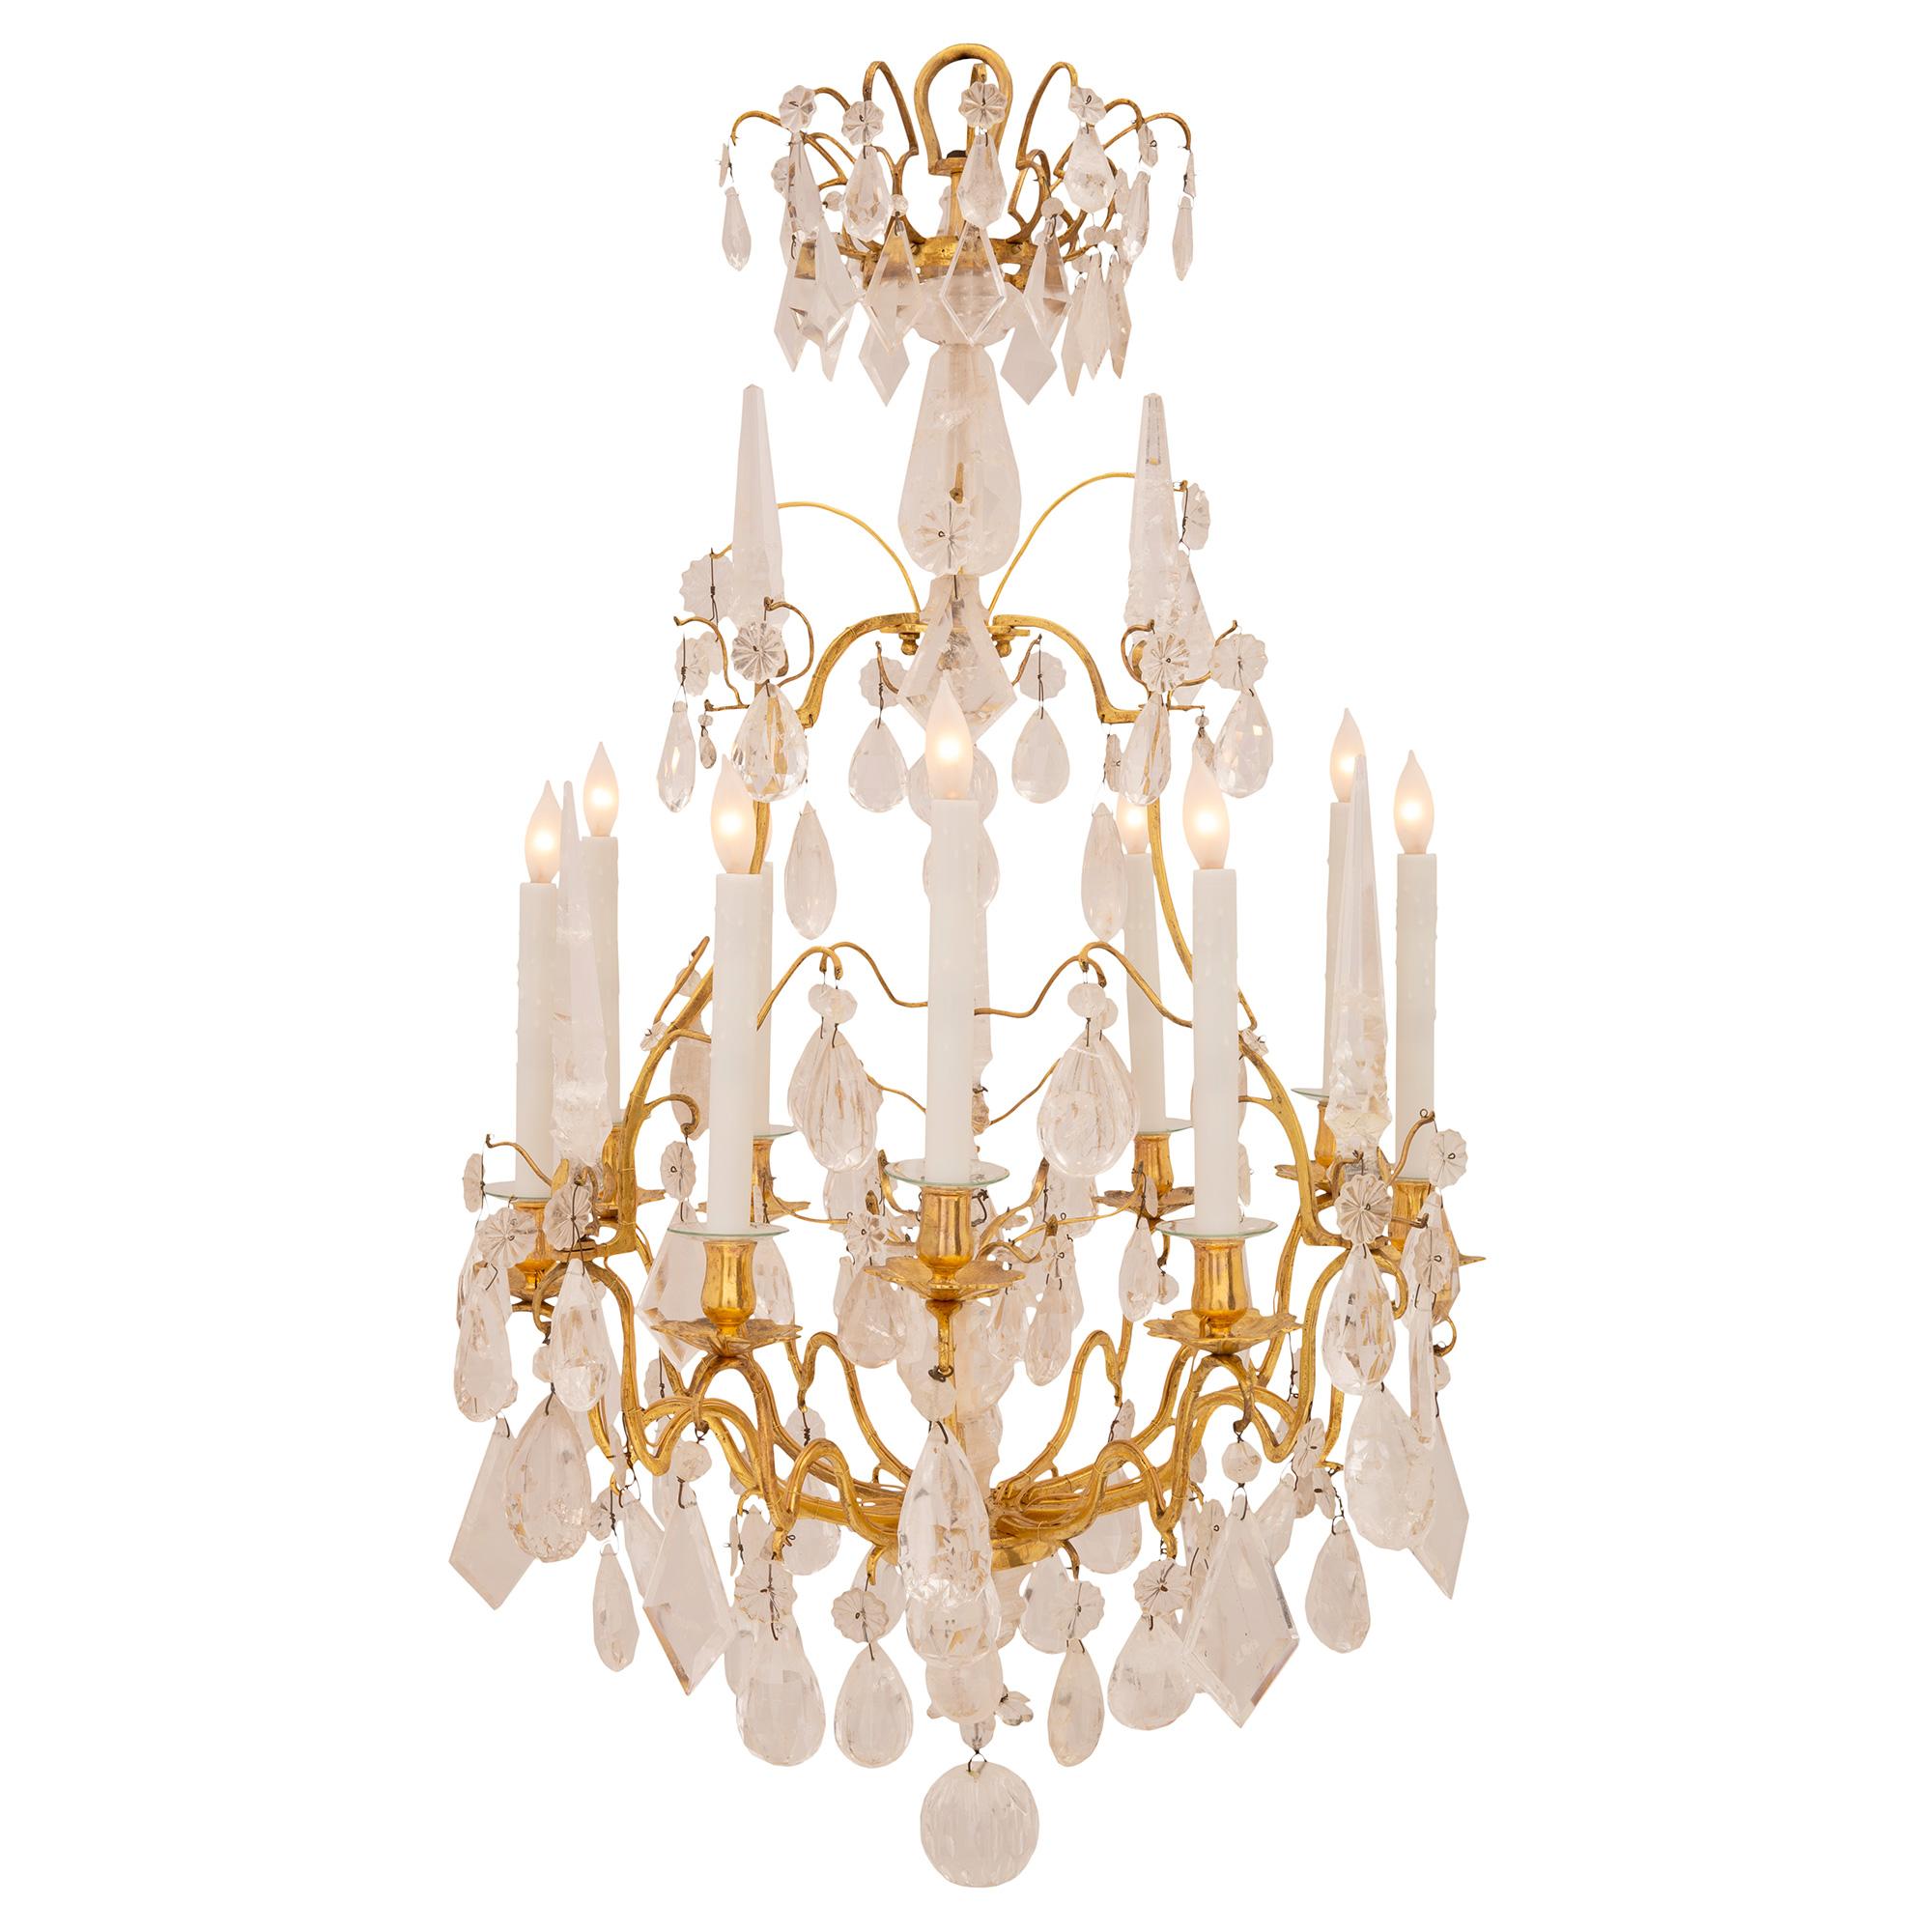 A stunning French 18th century Louis XV period ormolu and rock crystal chandelier. The nine arm chandelier is centered by a beautiful solid rock crystal ball pendant amidst additional superb tear drop shaped pendants. The elegant and most decorative